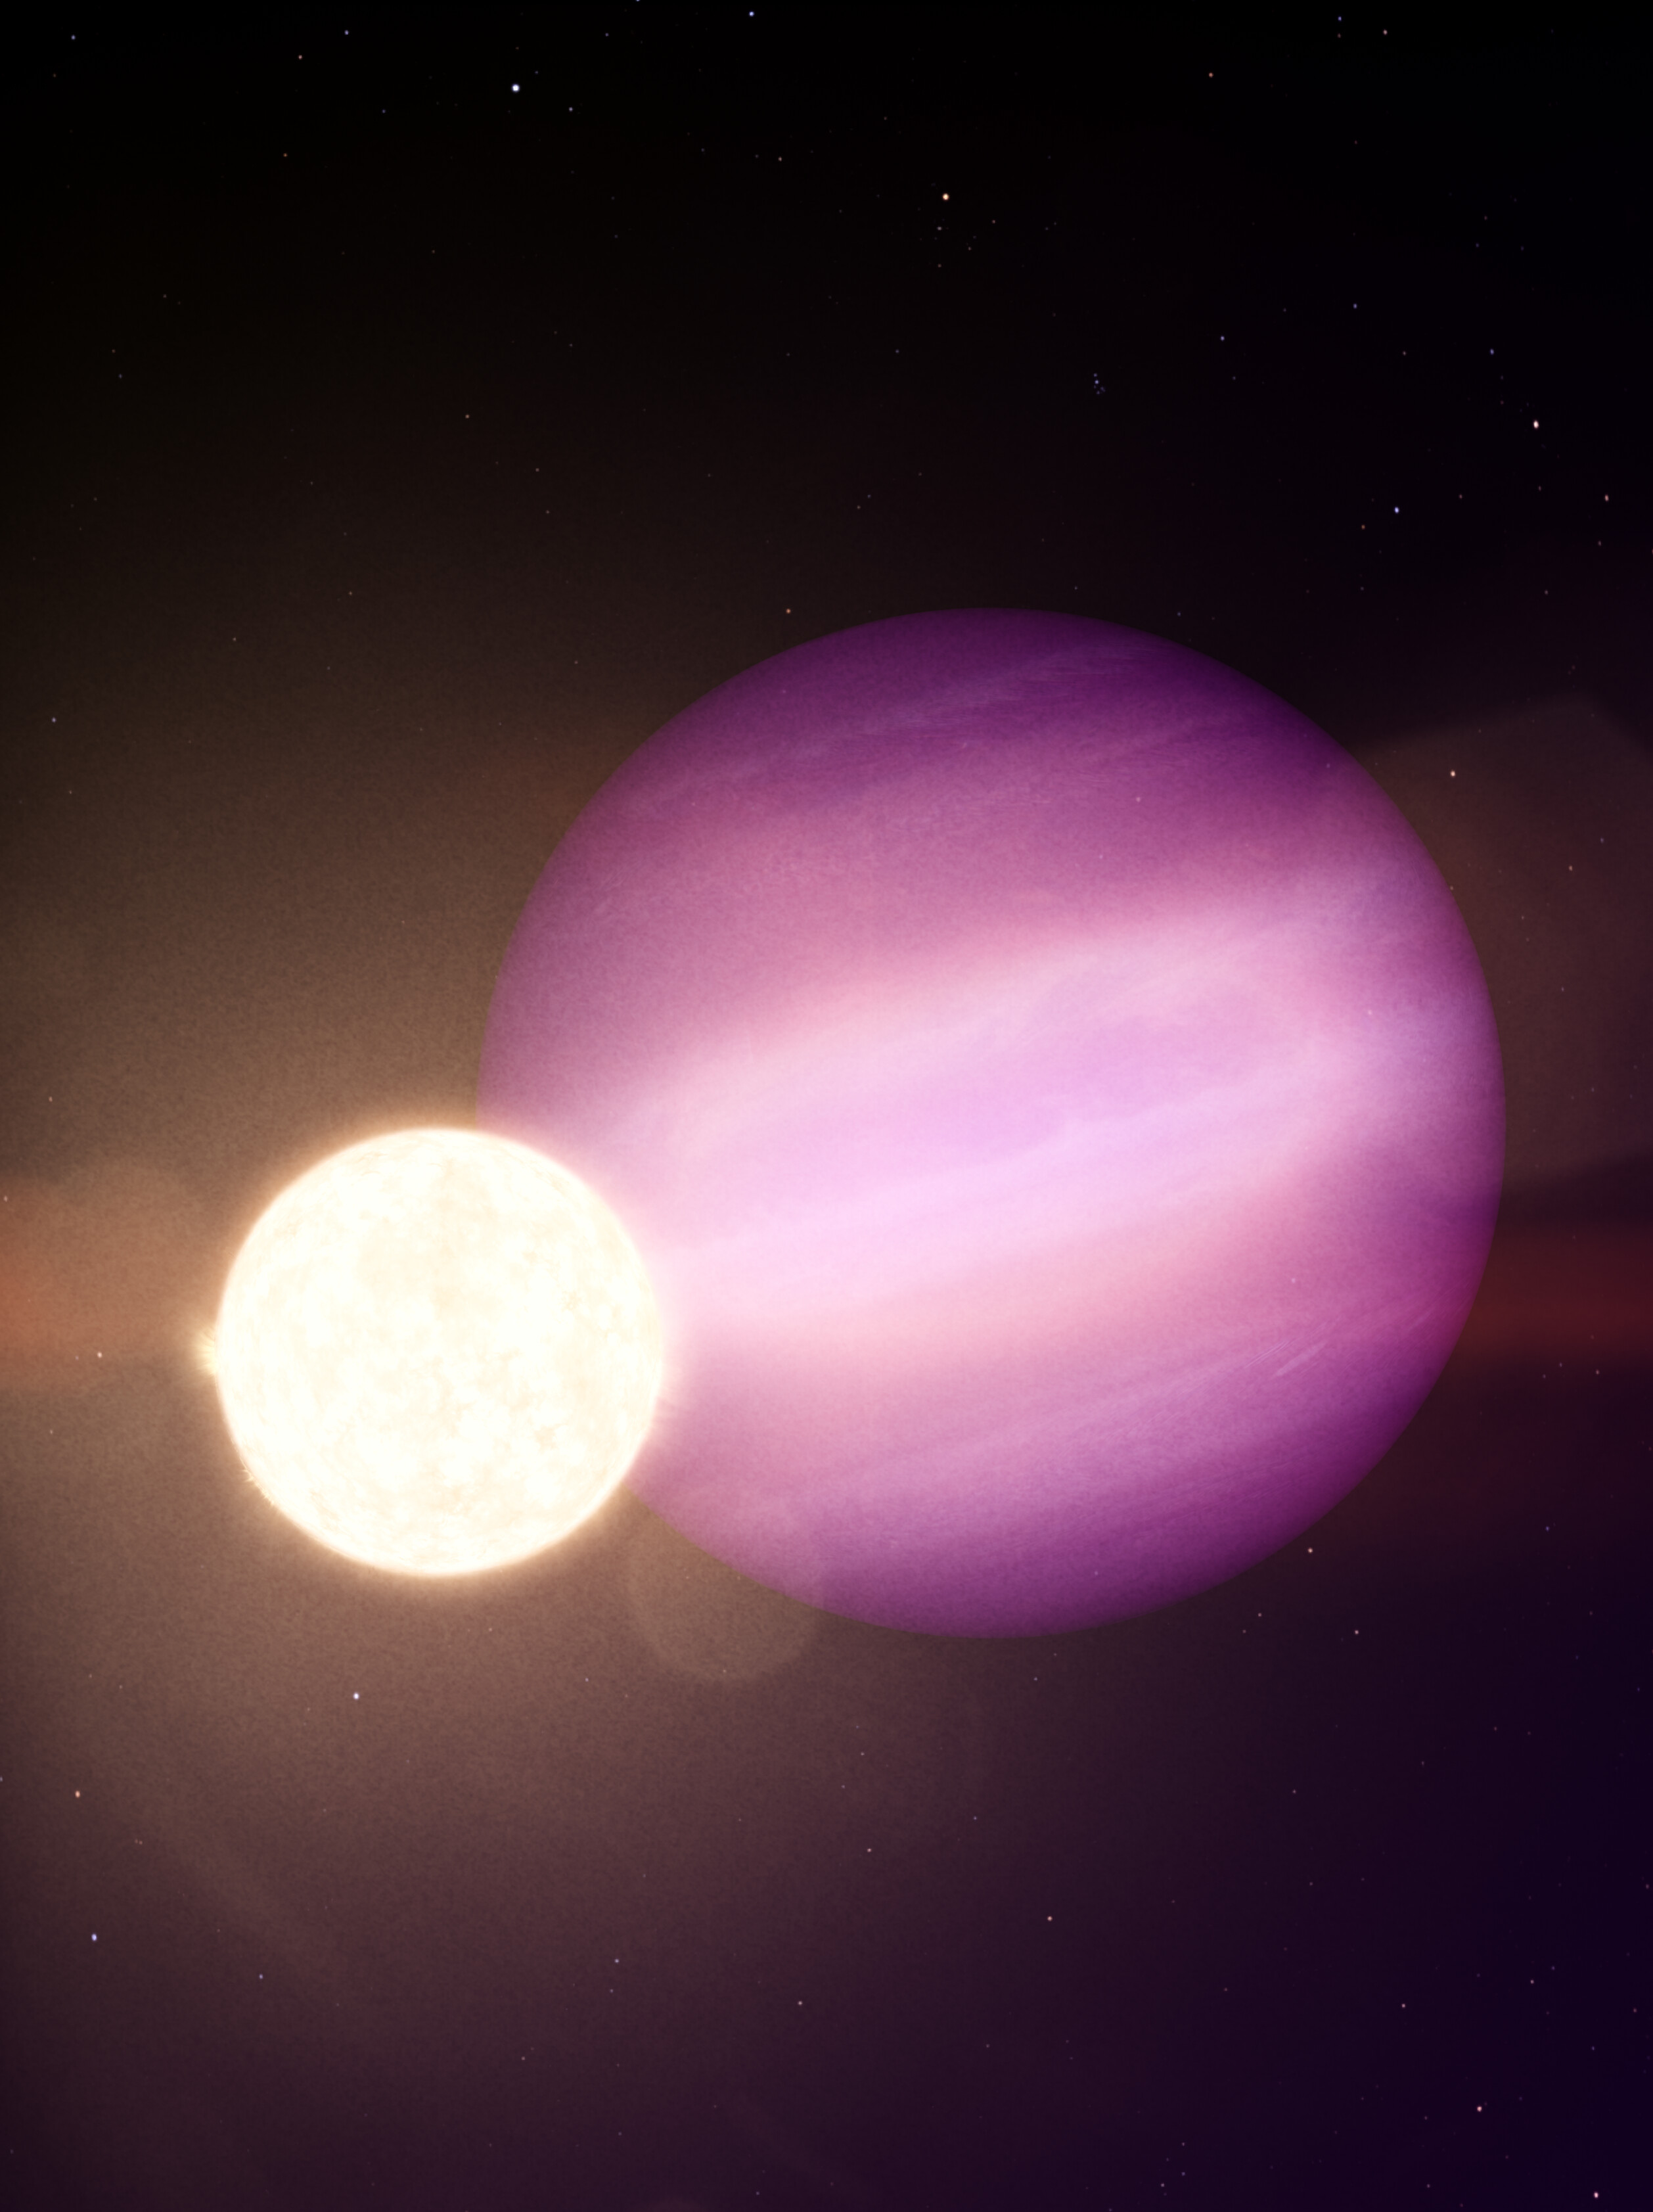 An artist's impression of two stars in space, representing the fate of a dying sun.